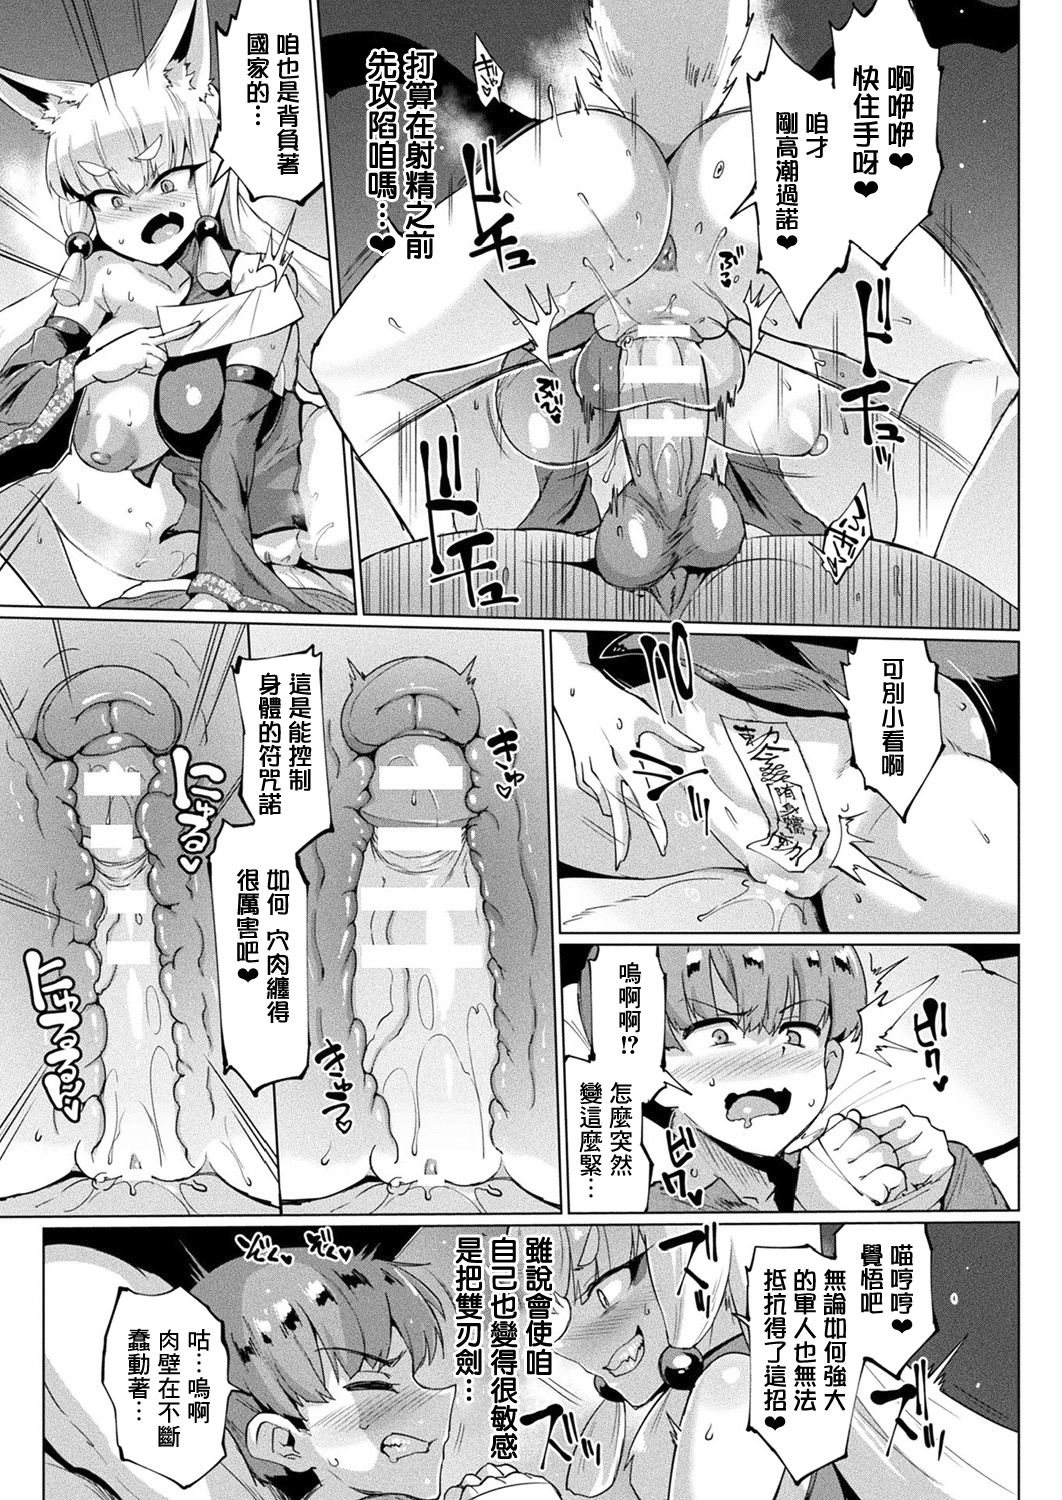 [Fan no hitori] YOUR GRACE, MY MASTER (COMIC Unreal 2019-10 Vol. 81) [Chinese] [鬼畜王汉化组] [Digital] page 14 full